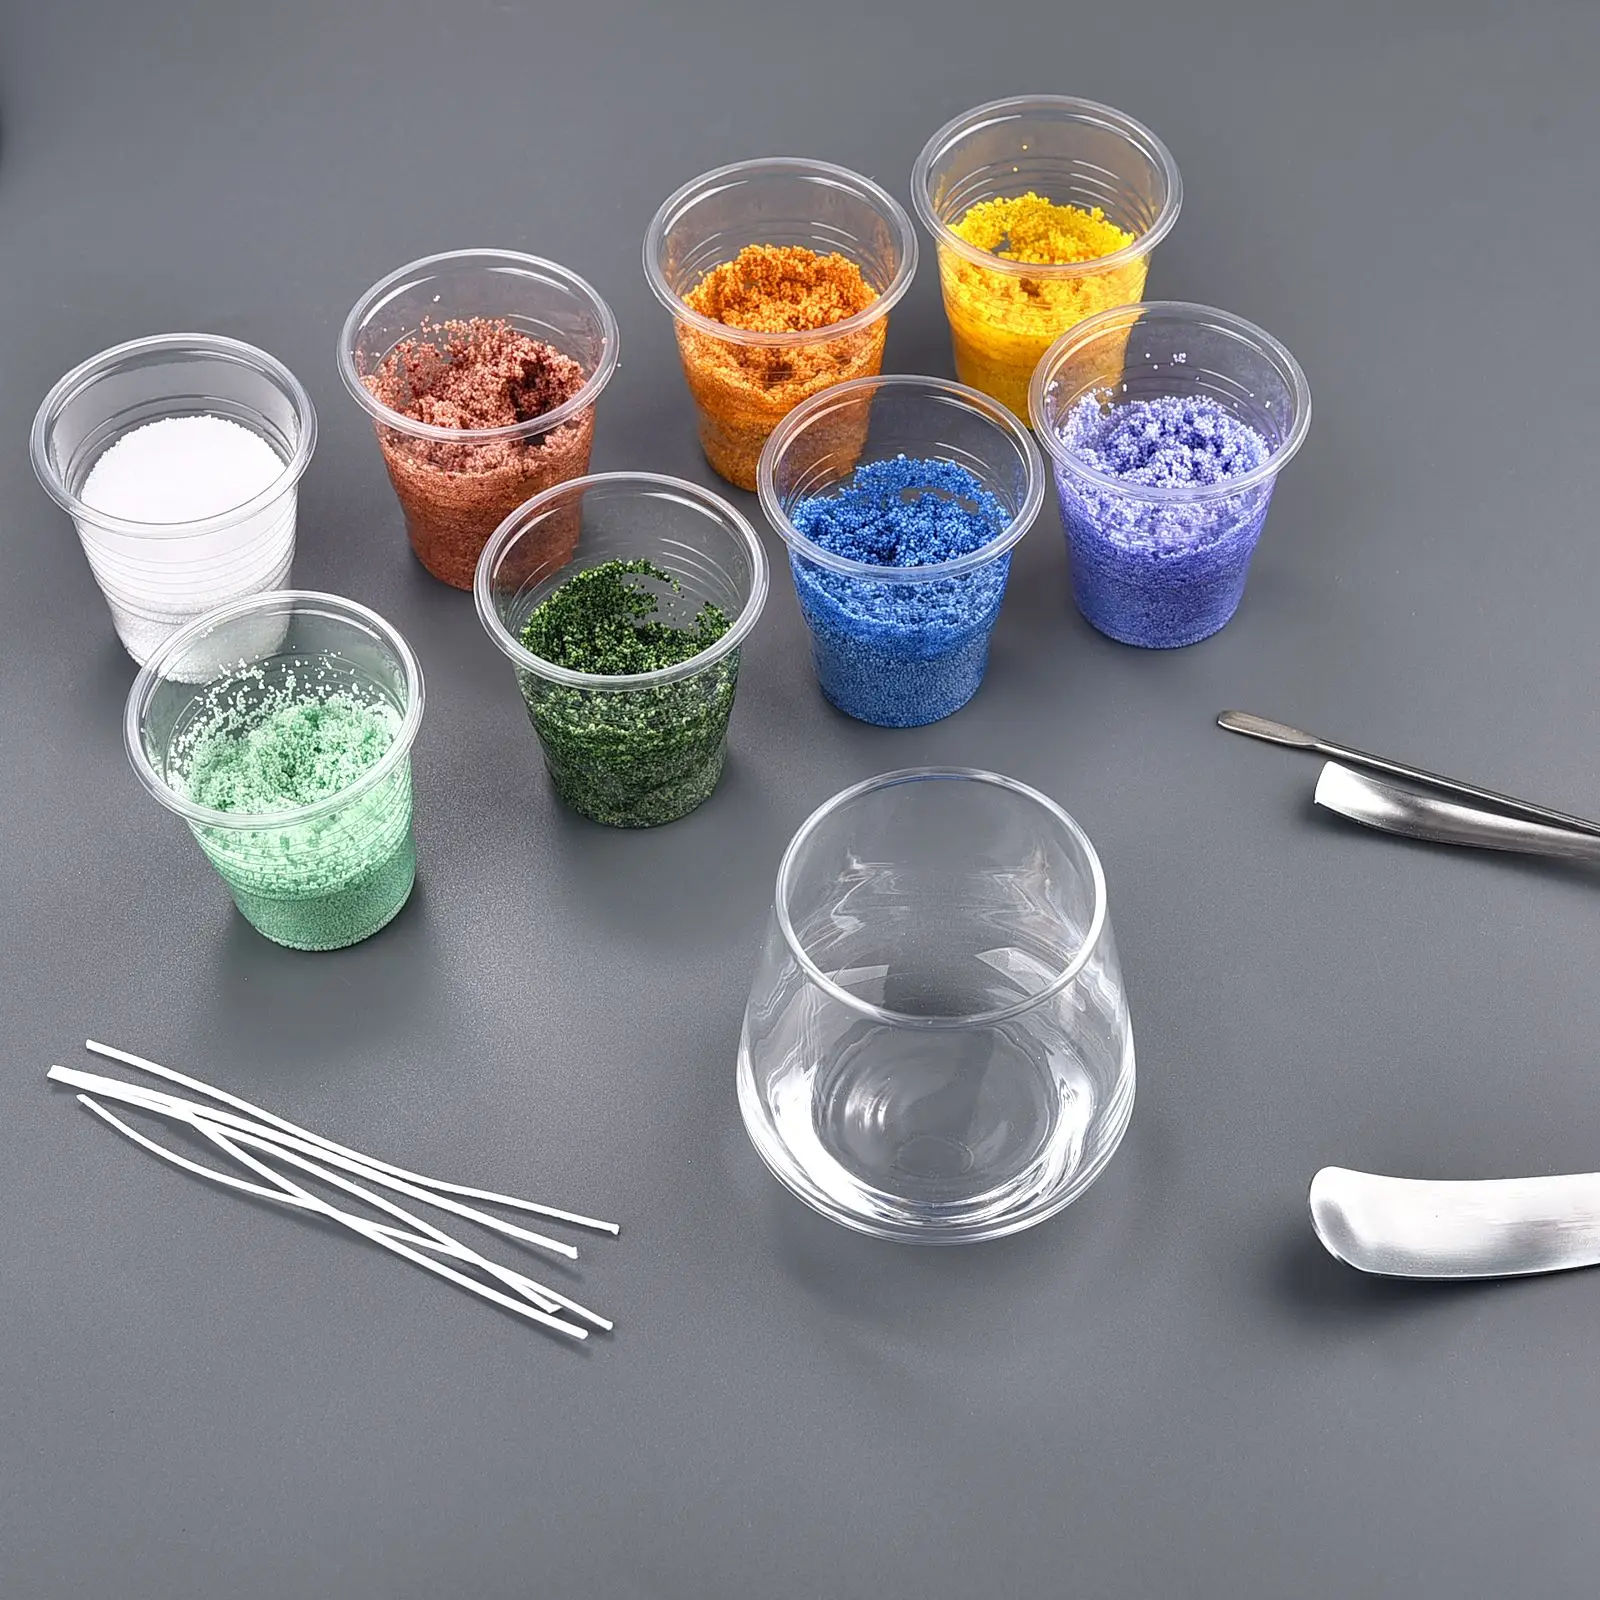 10G Colorful Sand Wax Ice Flower Wax DIY Candle Making Accessories